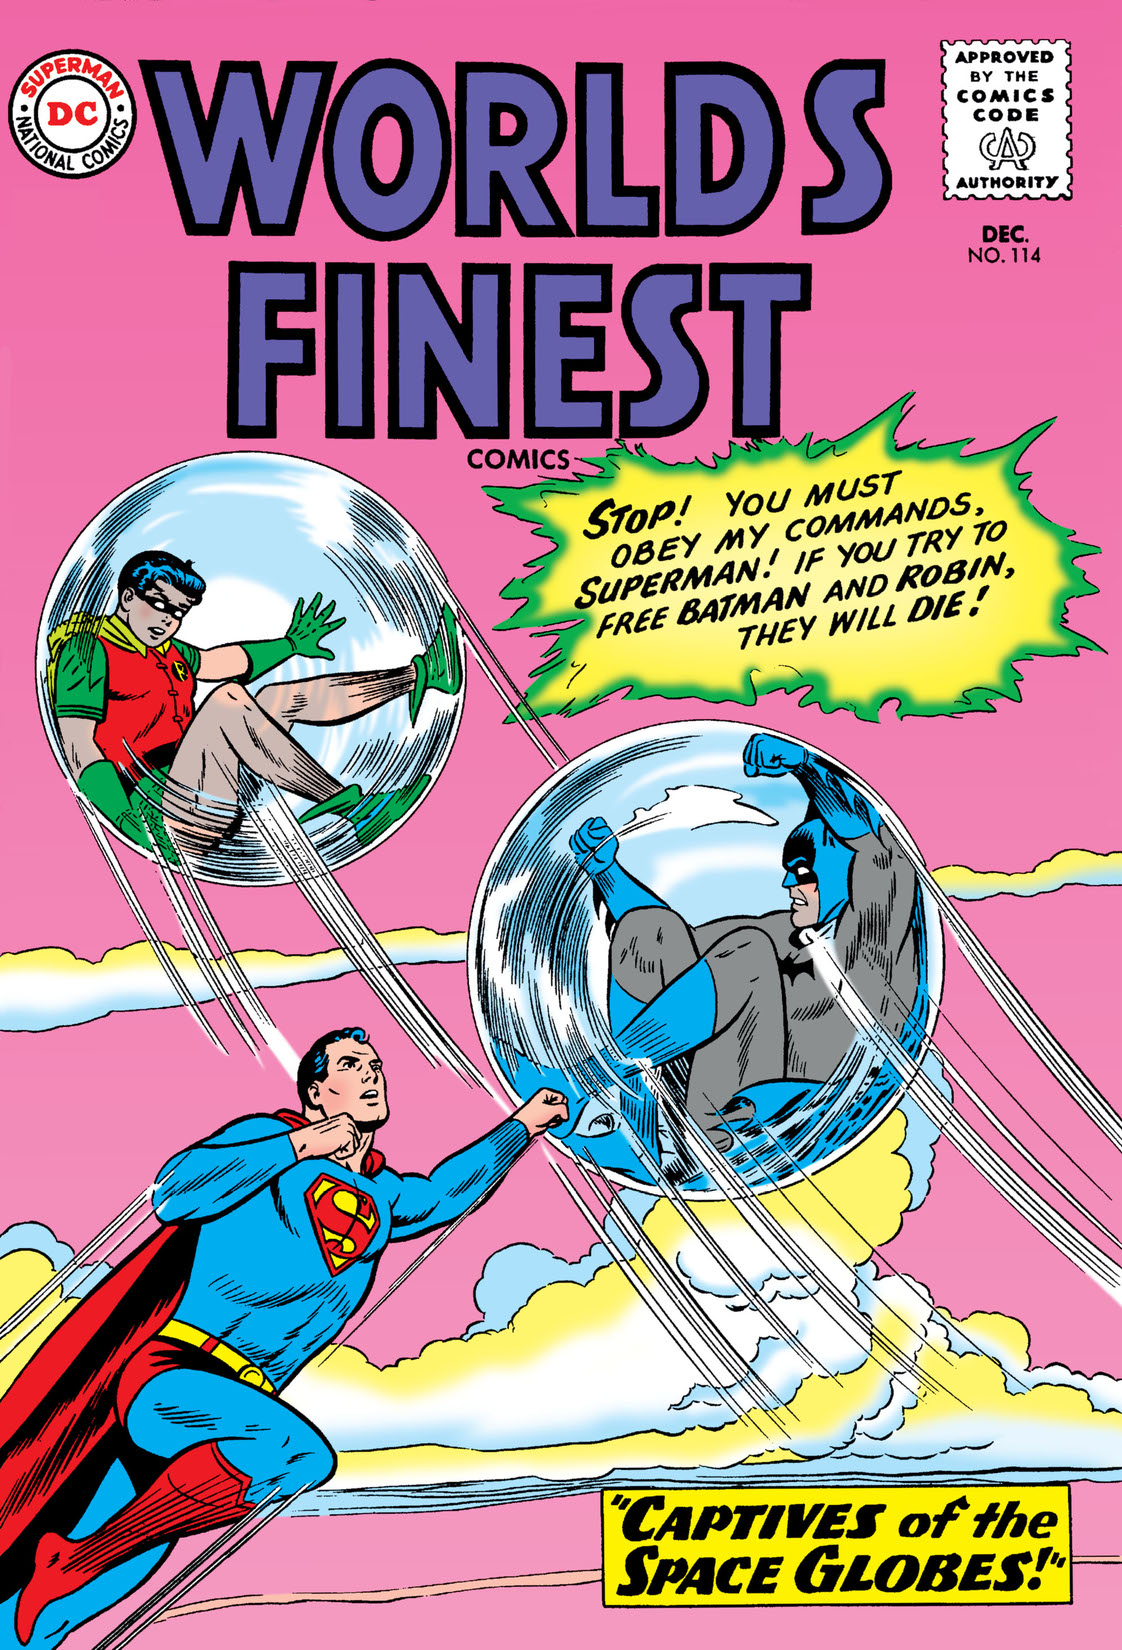 World's Finest Comics (1941-) #114 preview images